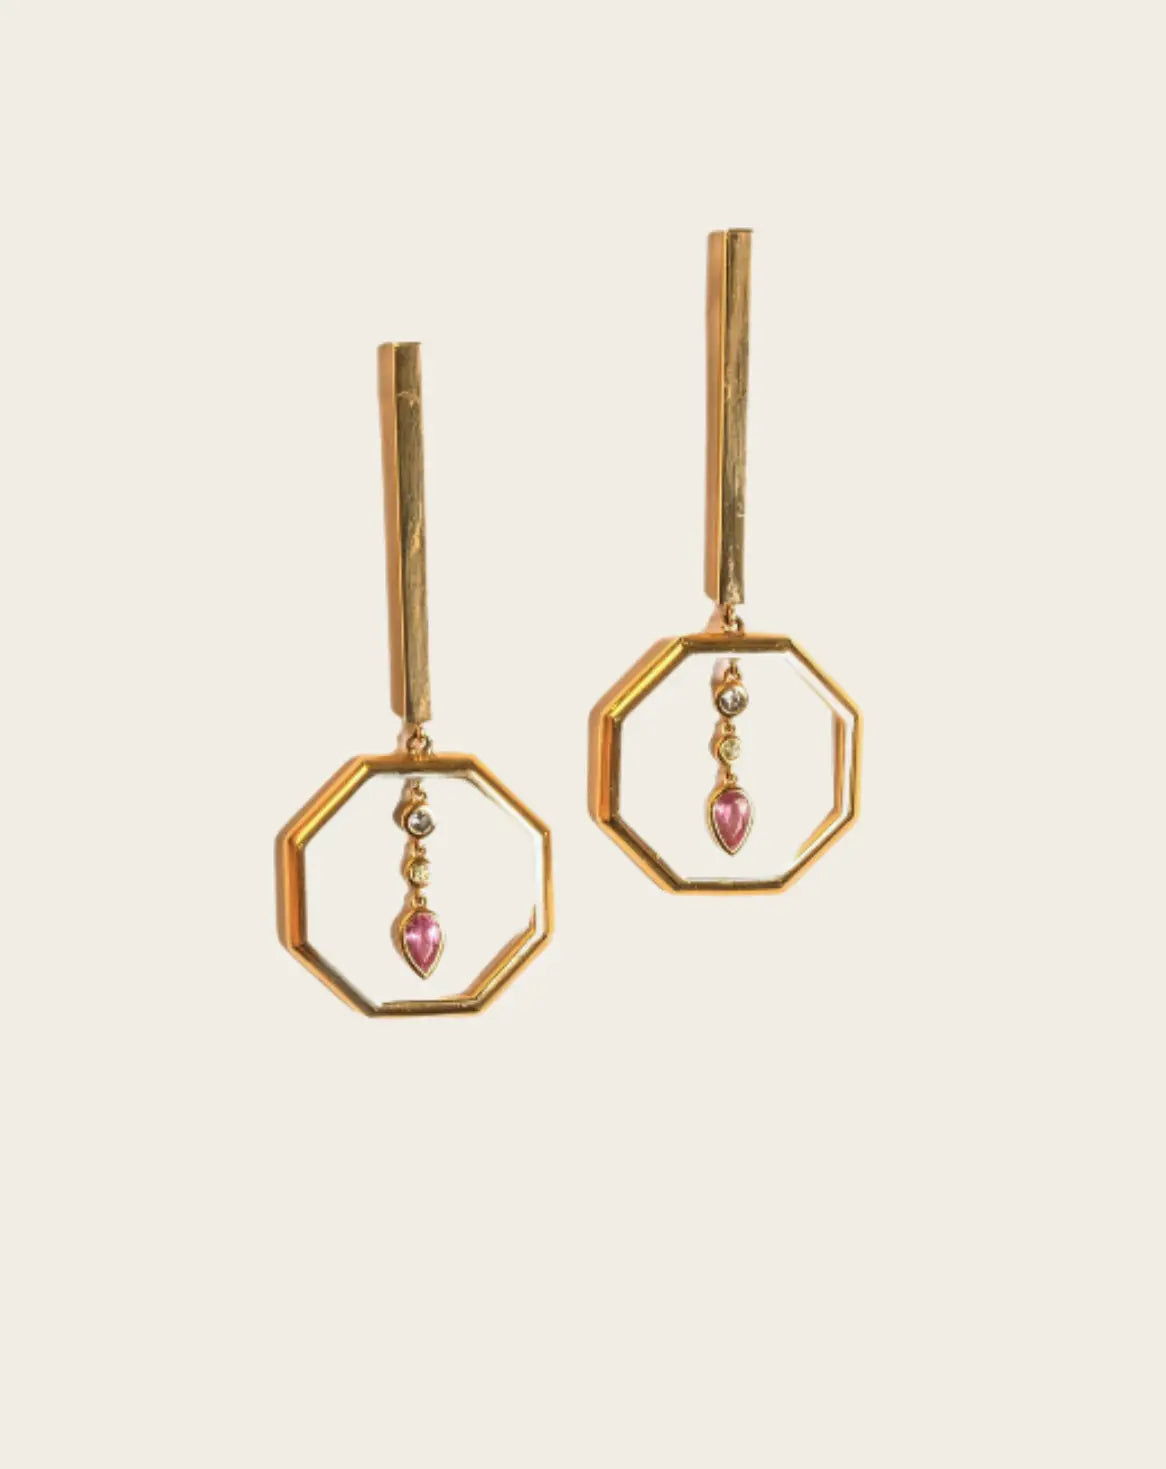 Pink Sapphire and Gold Earrings Pink Sapphire and Gold Earrings Sorellina Sorellina  Squash Blossom Vail